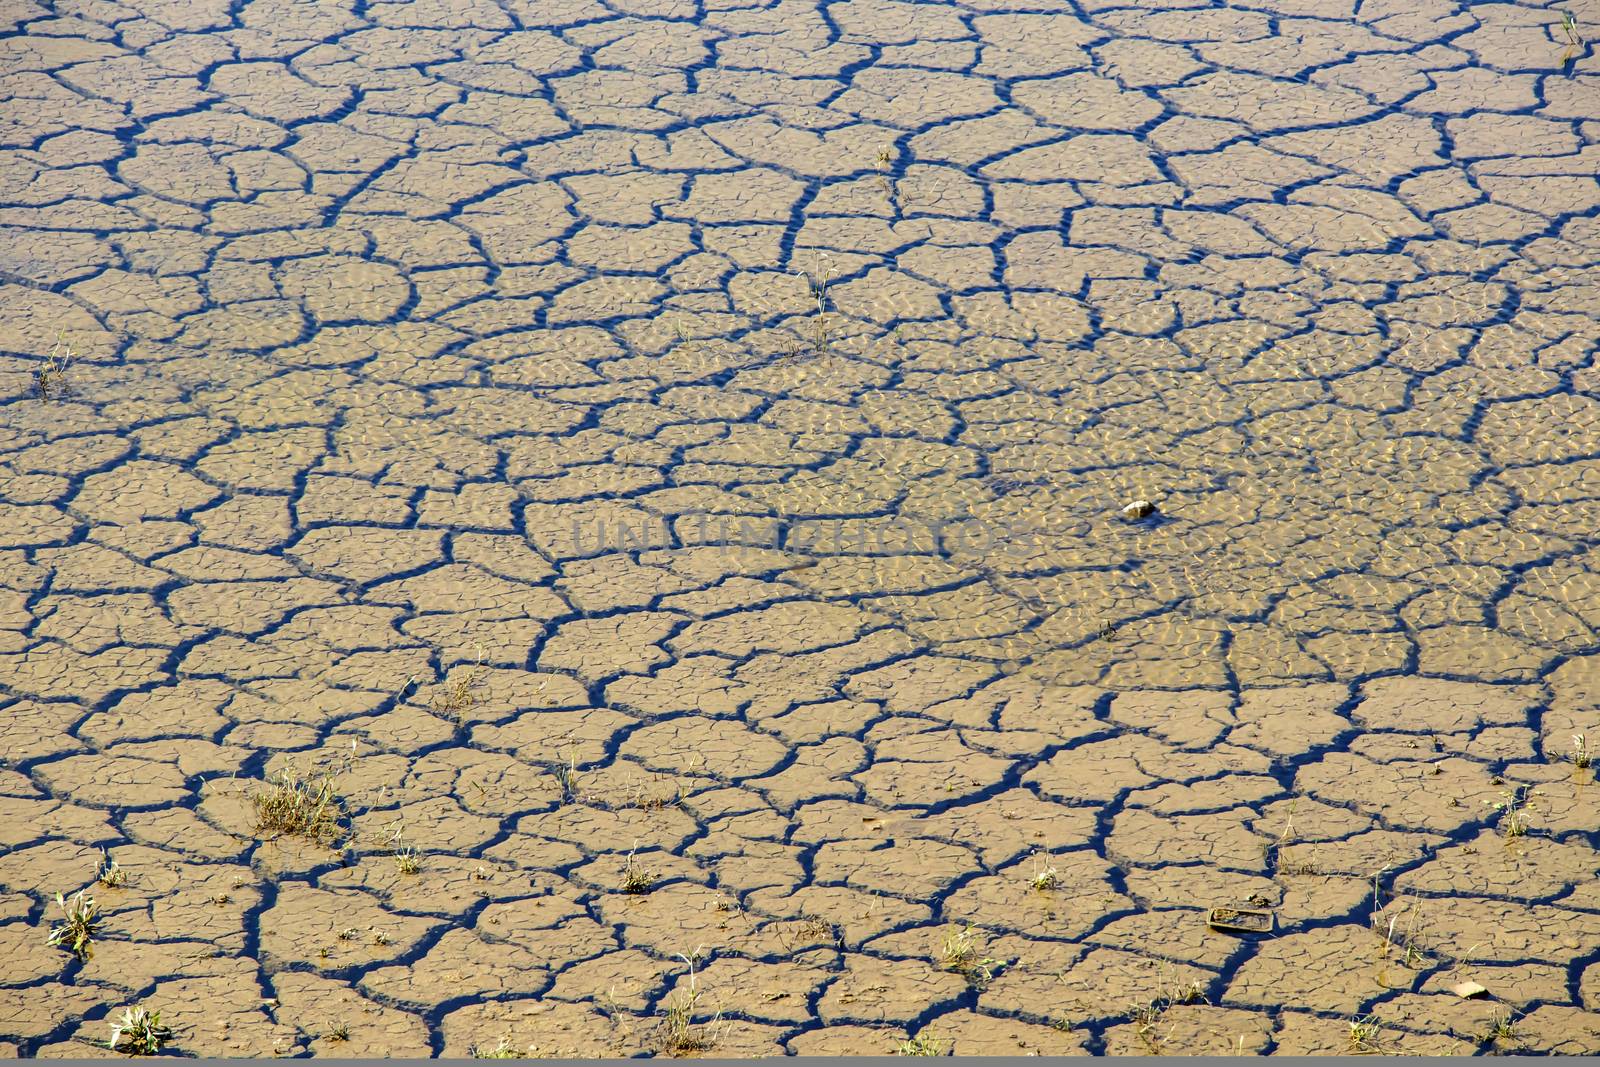 global warming and drought in nature